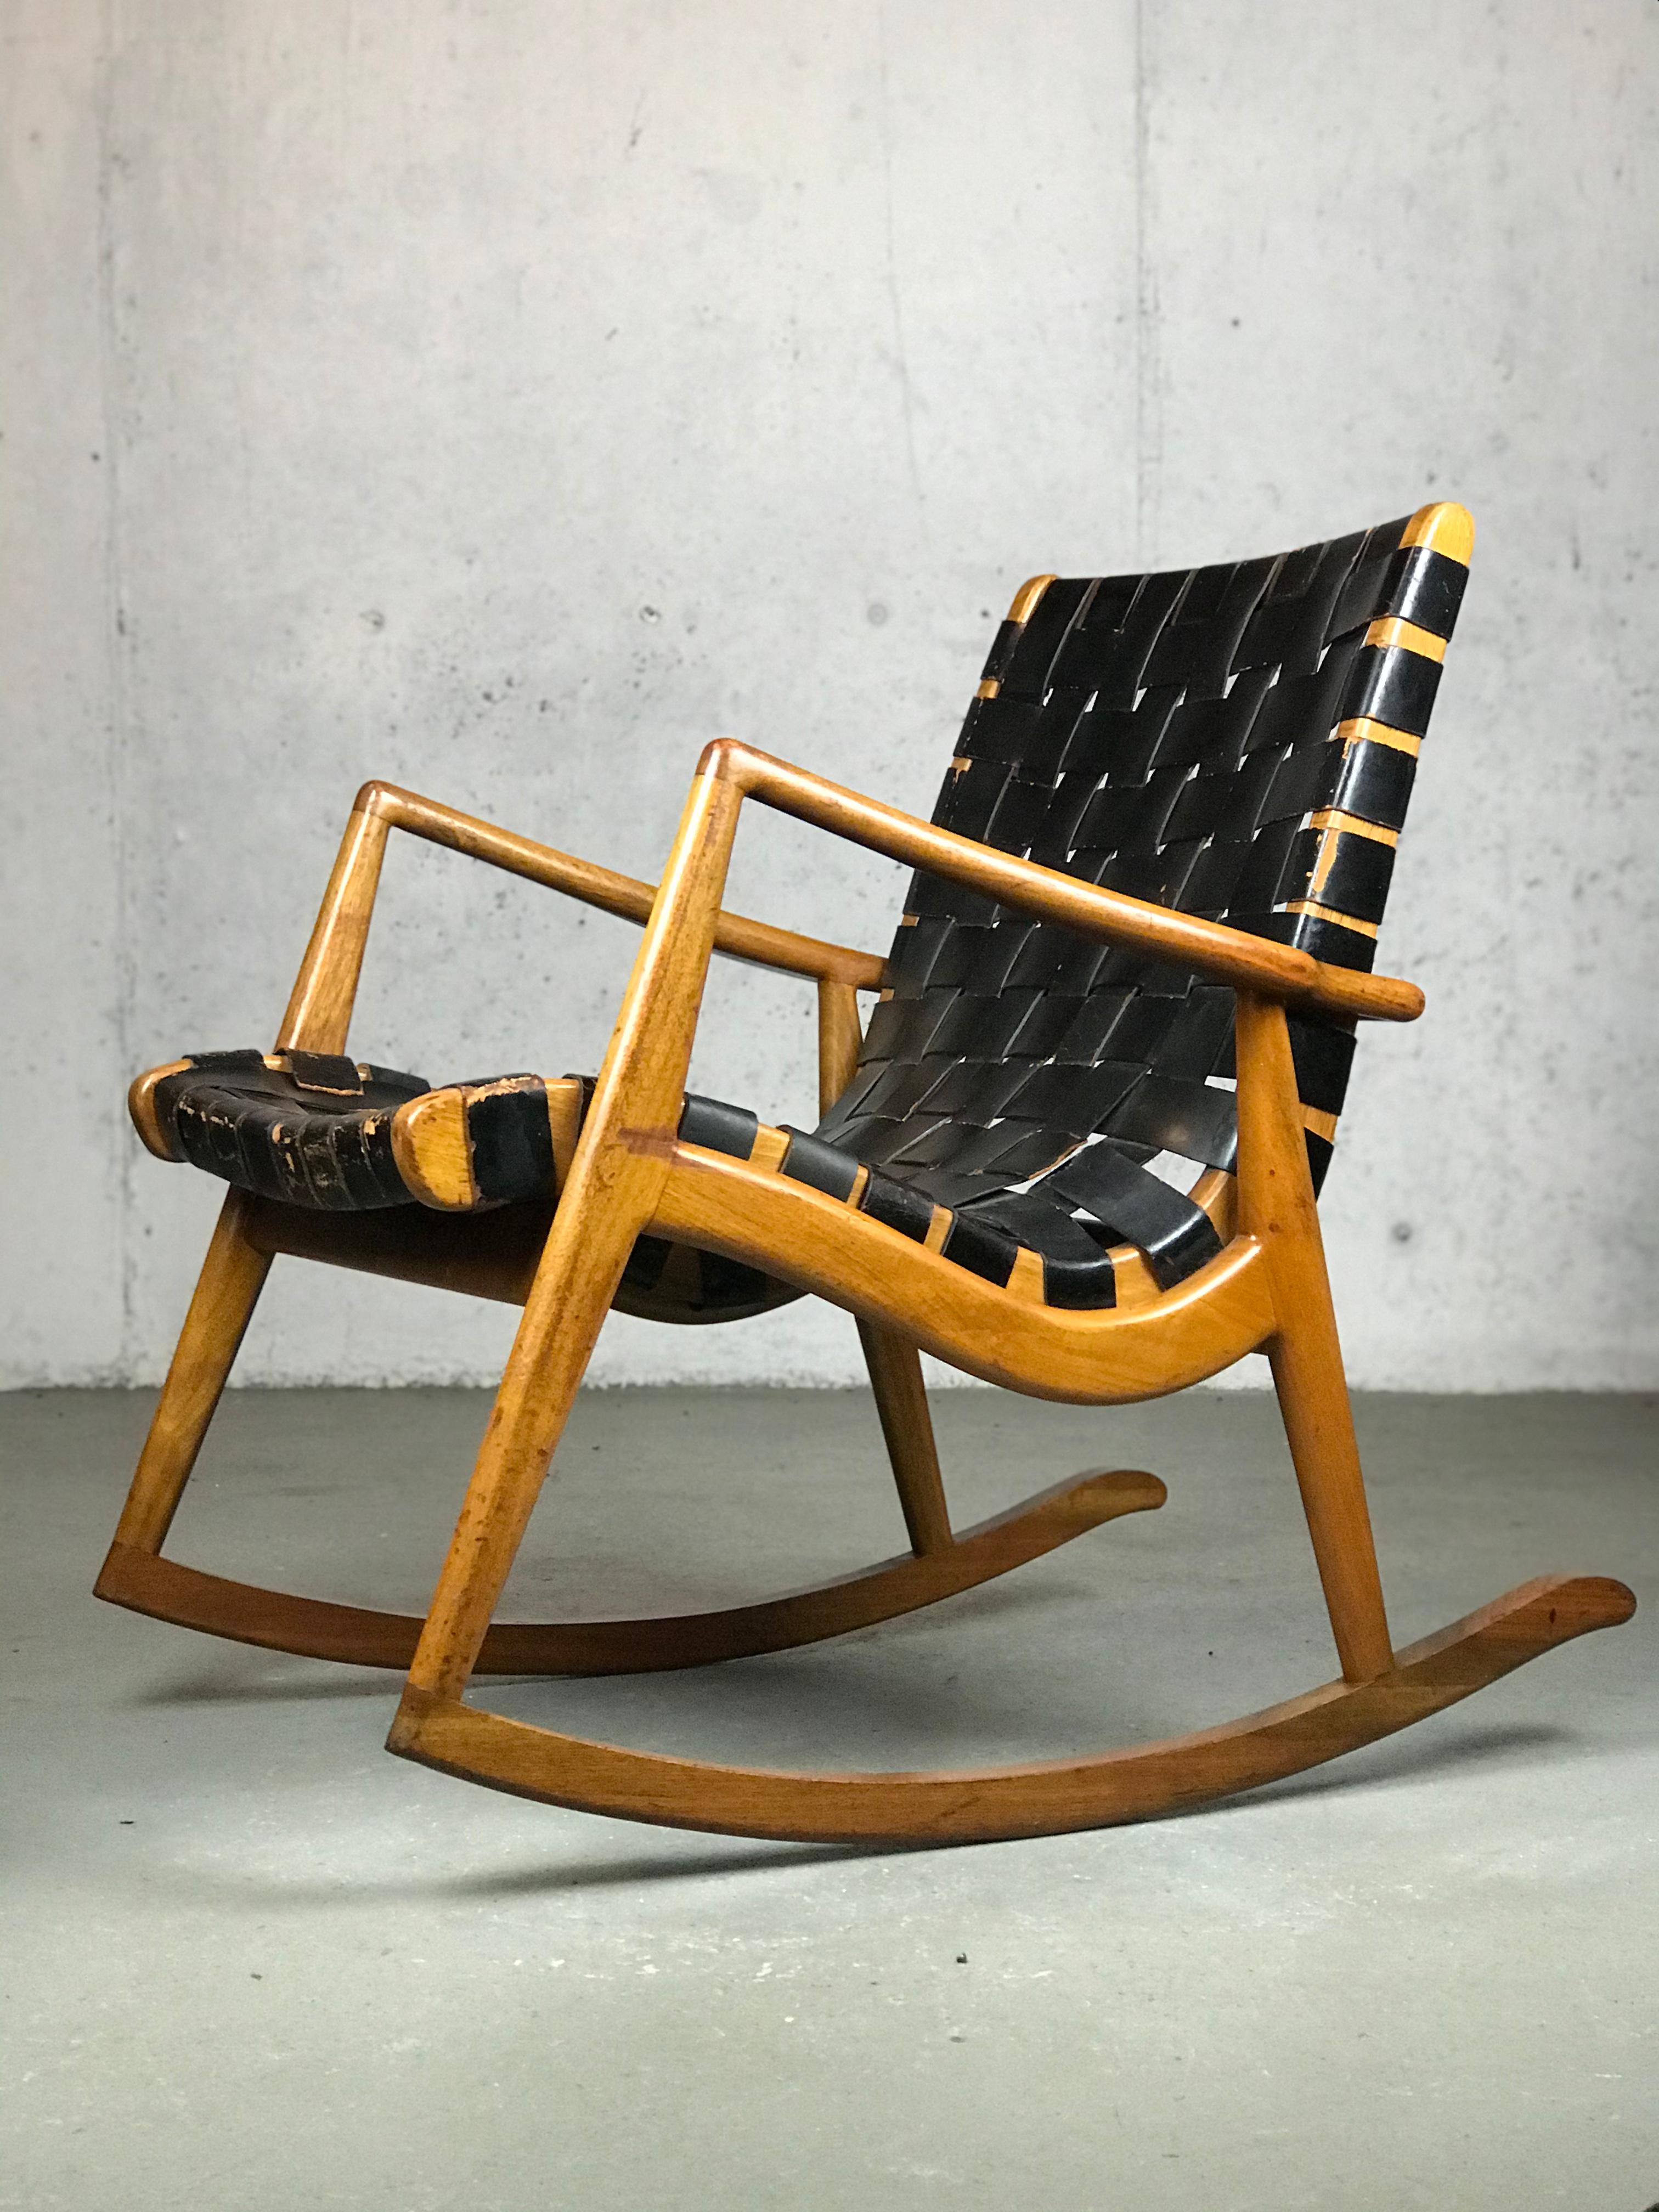 Custom made rocker in leather straps and walnut by Mel Smilow for Smilow-Thiel Furniture - 1950s.  When I emailed Mel's daughter, Pam, she said she had never seen the strap lounge in a rocker - and that this may be the only one.  
Original